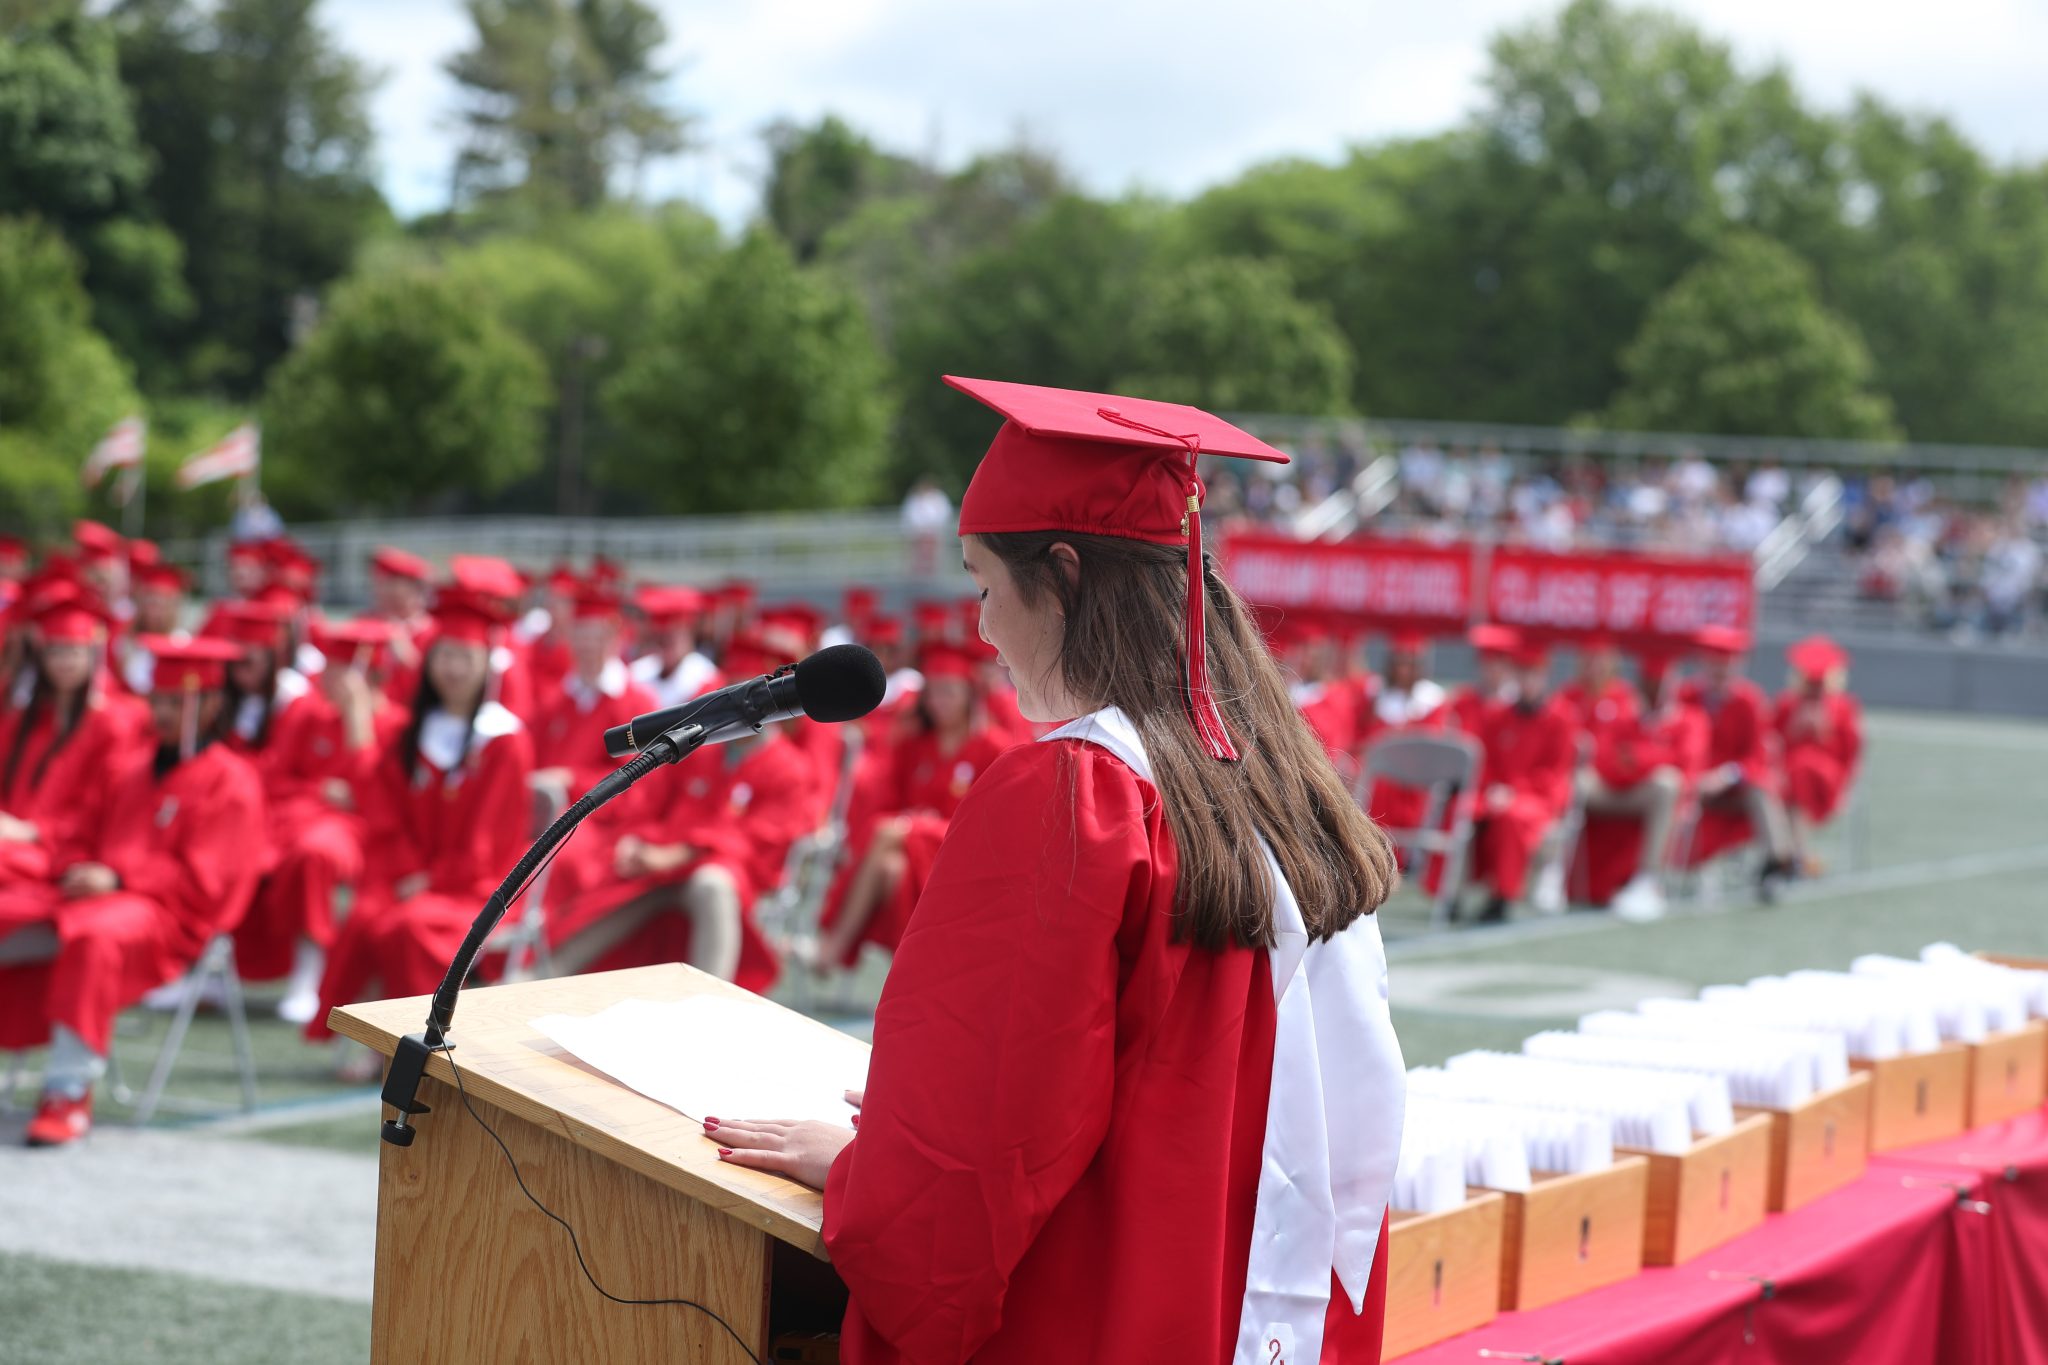 Student speaker and Student Council President Elle Cavanaugh equated her time in high school to the steps in writing a great essay.